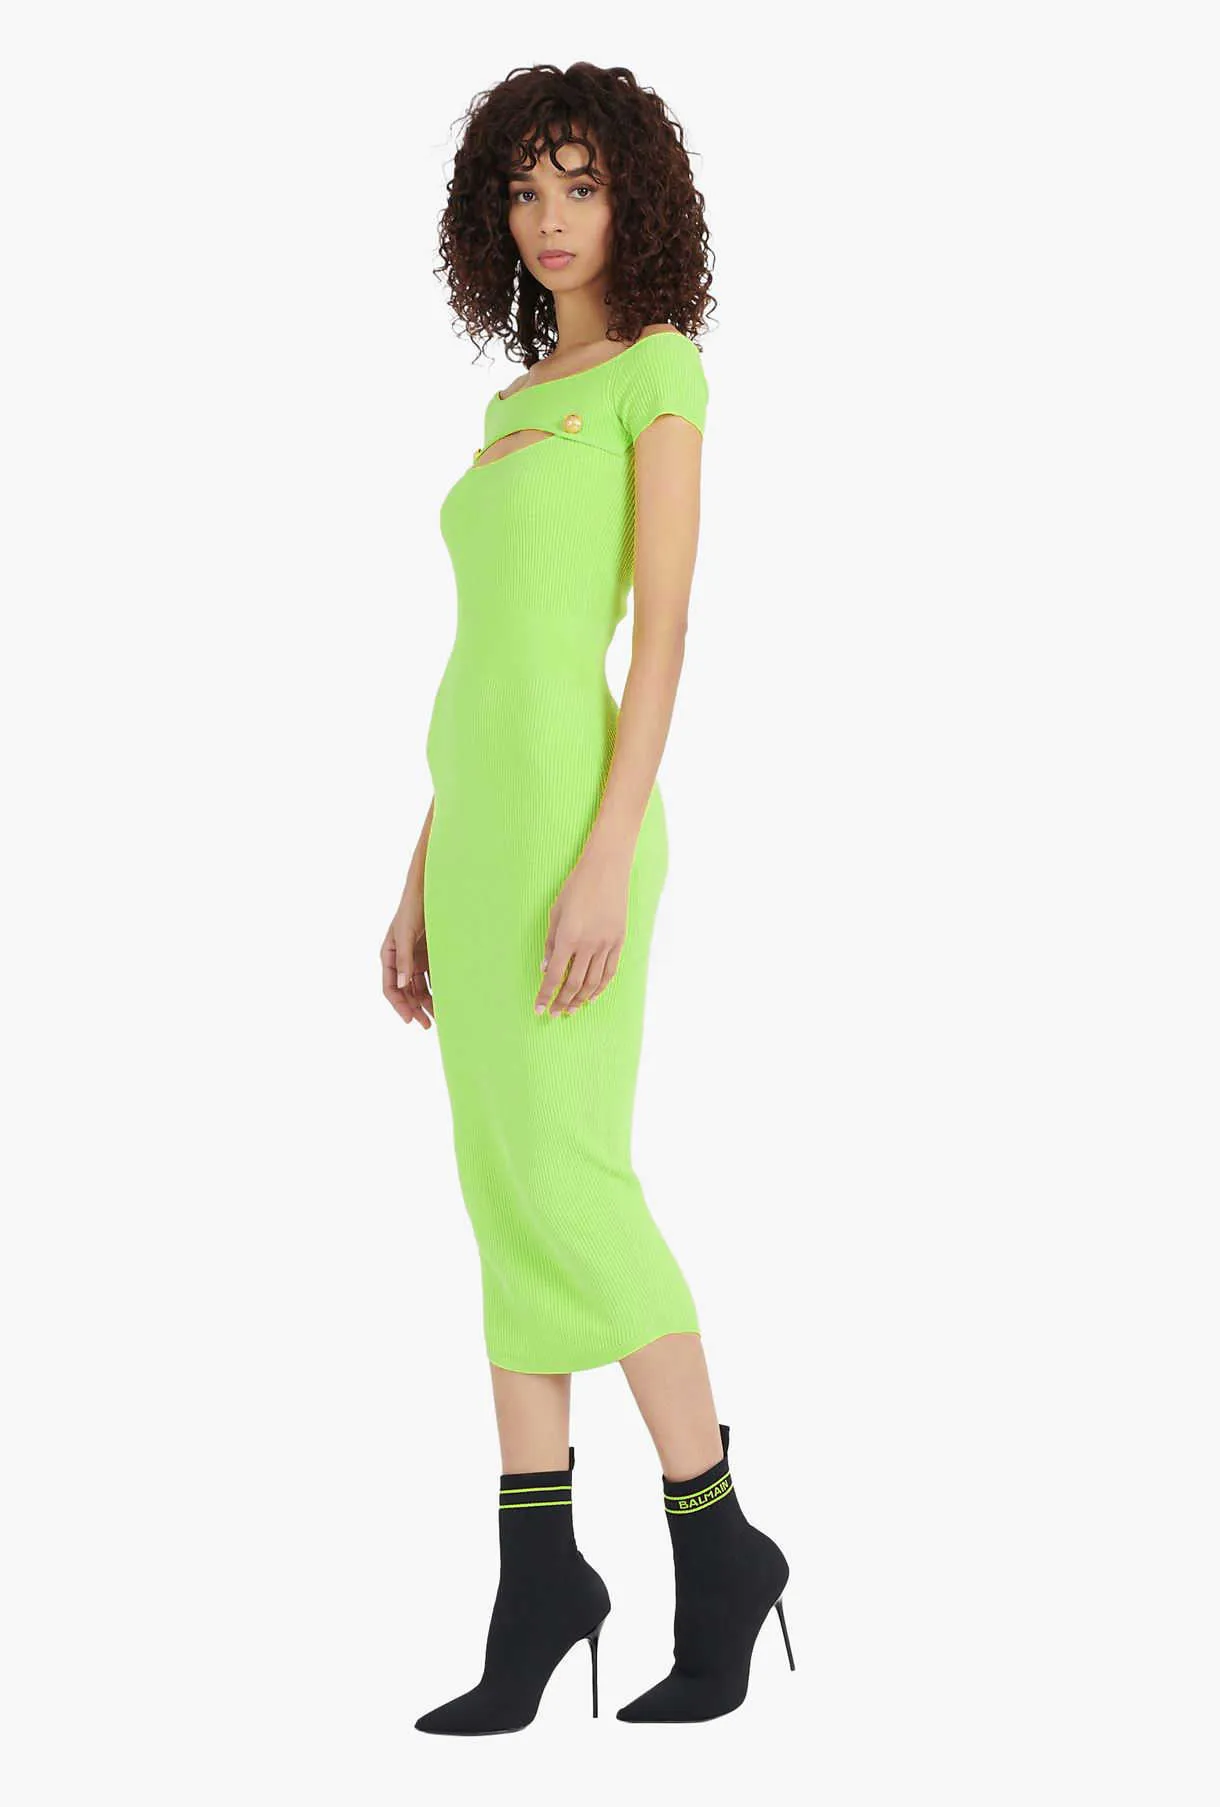 Ocstrade Bandage Dress Arrival Neon Green Bodycon Women Summer Sexy Cut Out Midi Party Club Outfits 210527